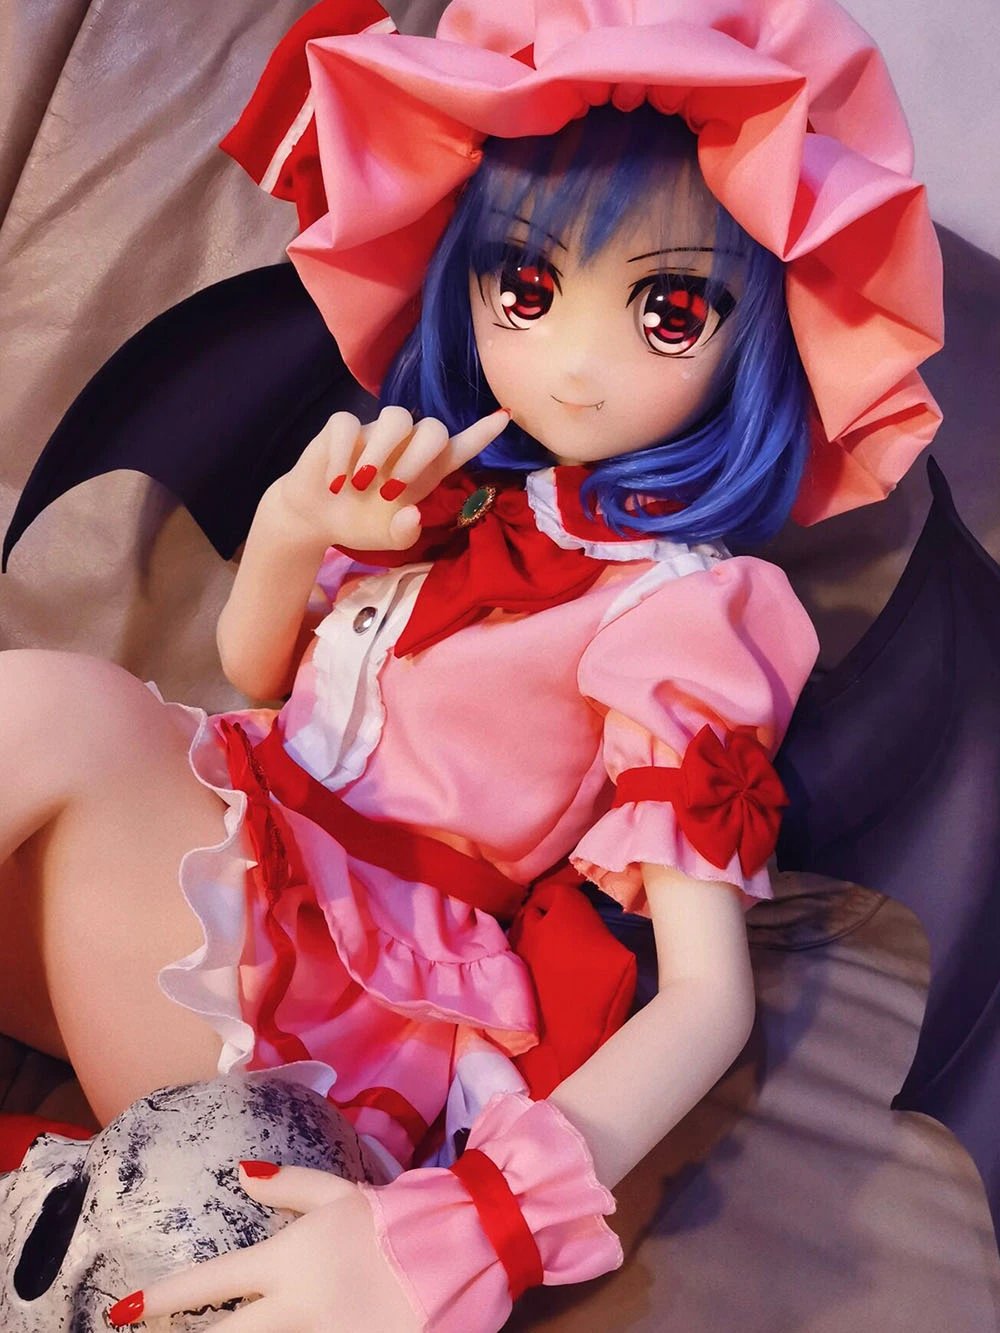  Touhou Project love doll